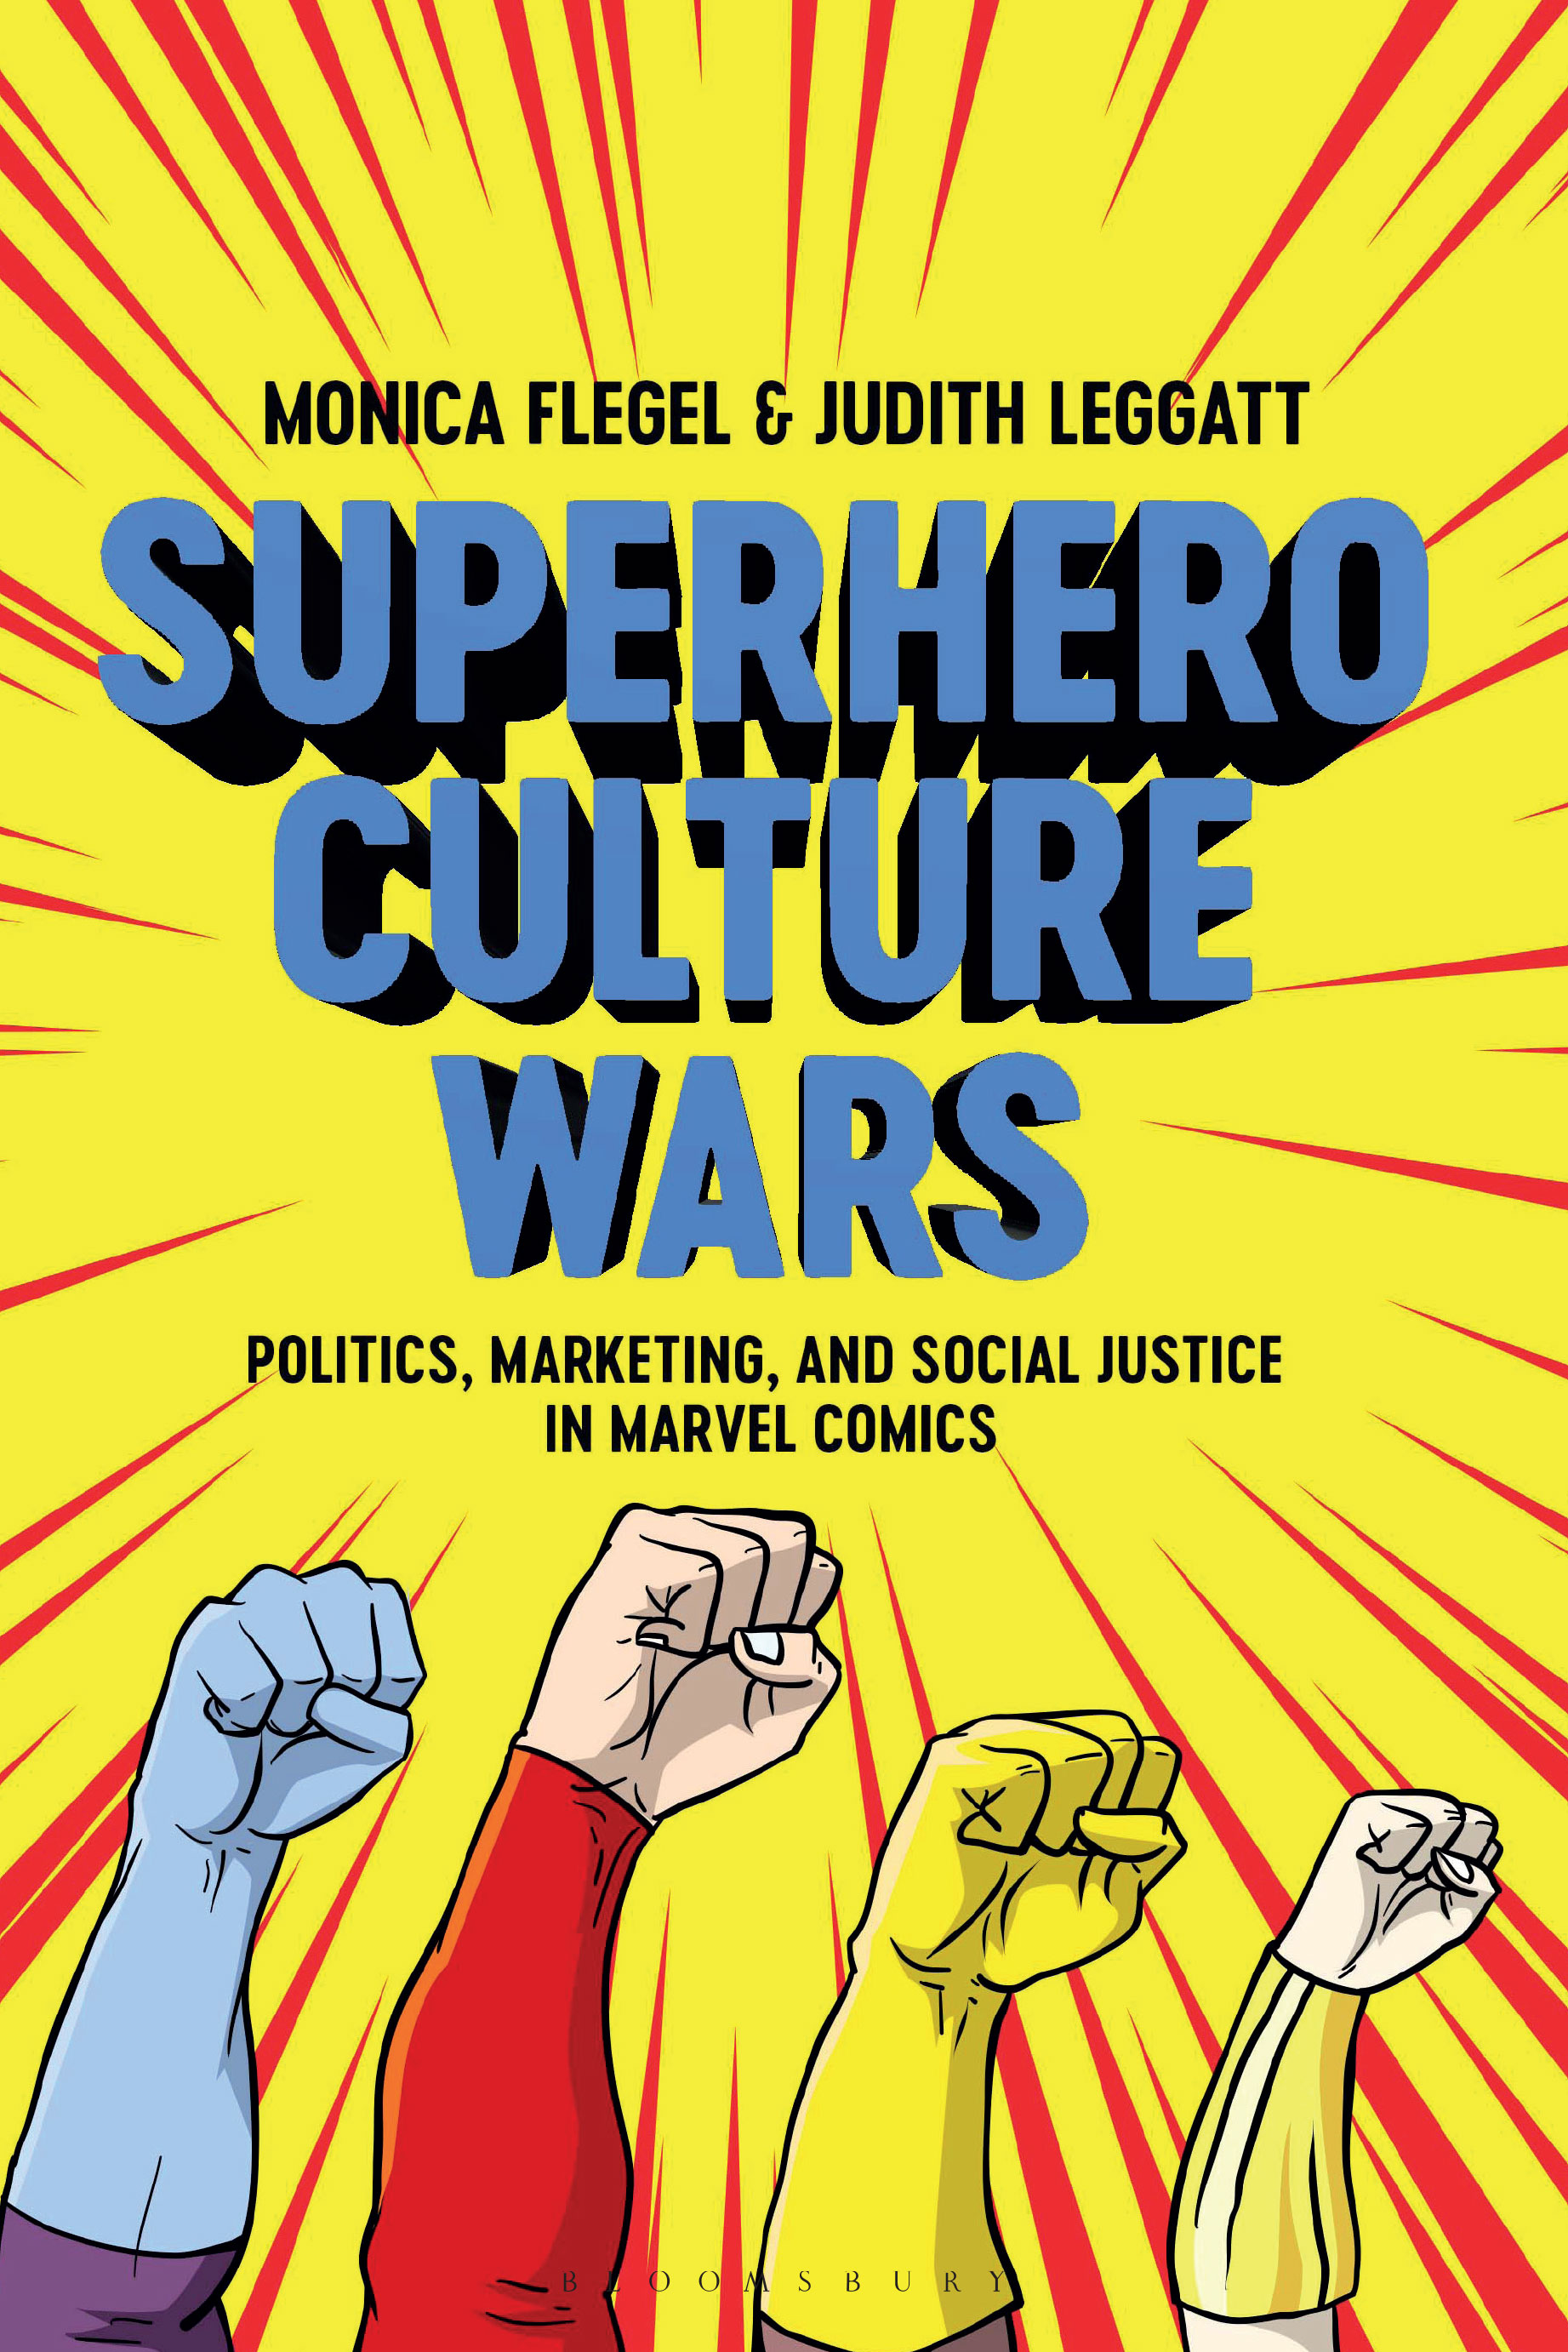 Cover of Superhero Culture Wars book with a cartoon drawing of raised fists